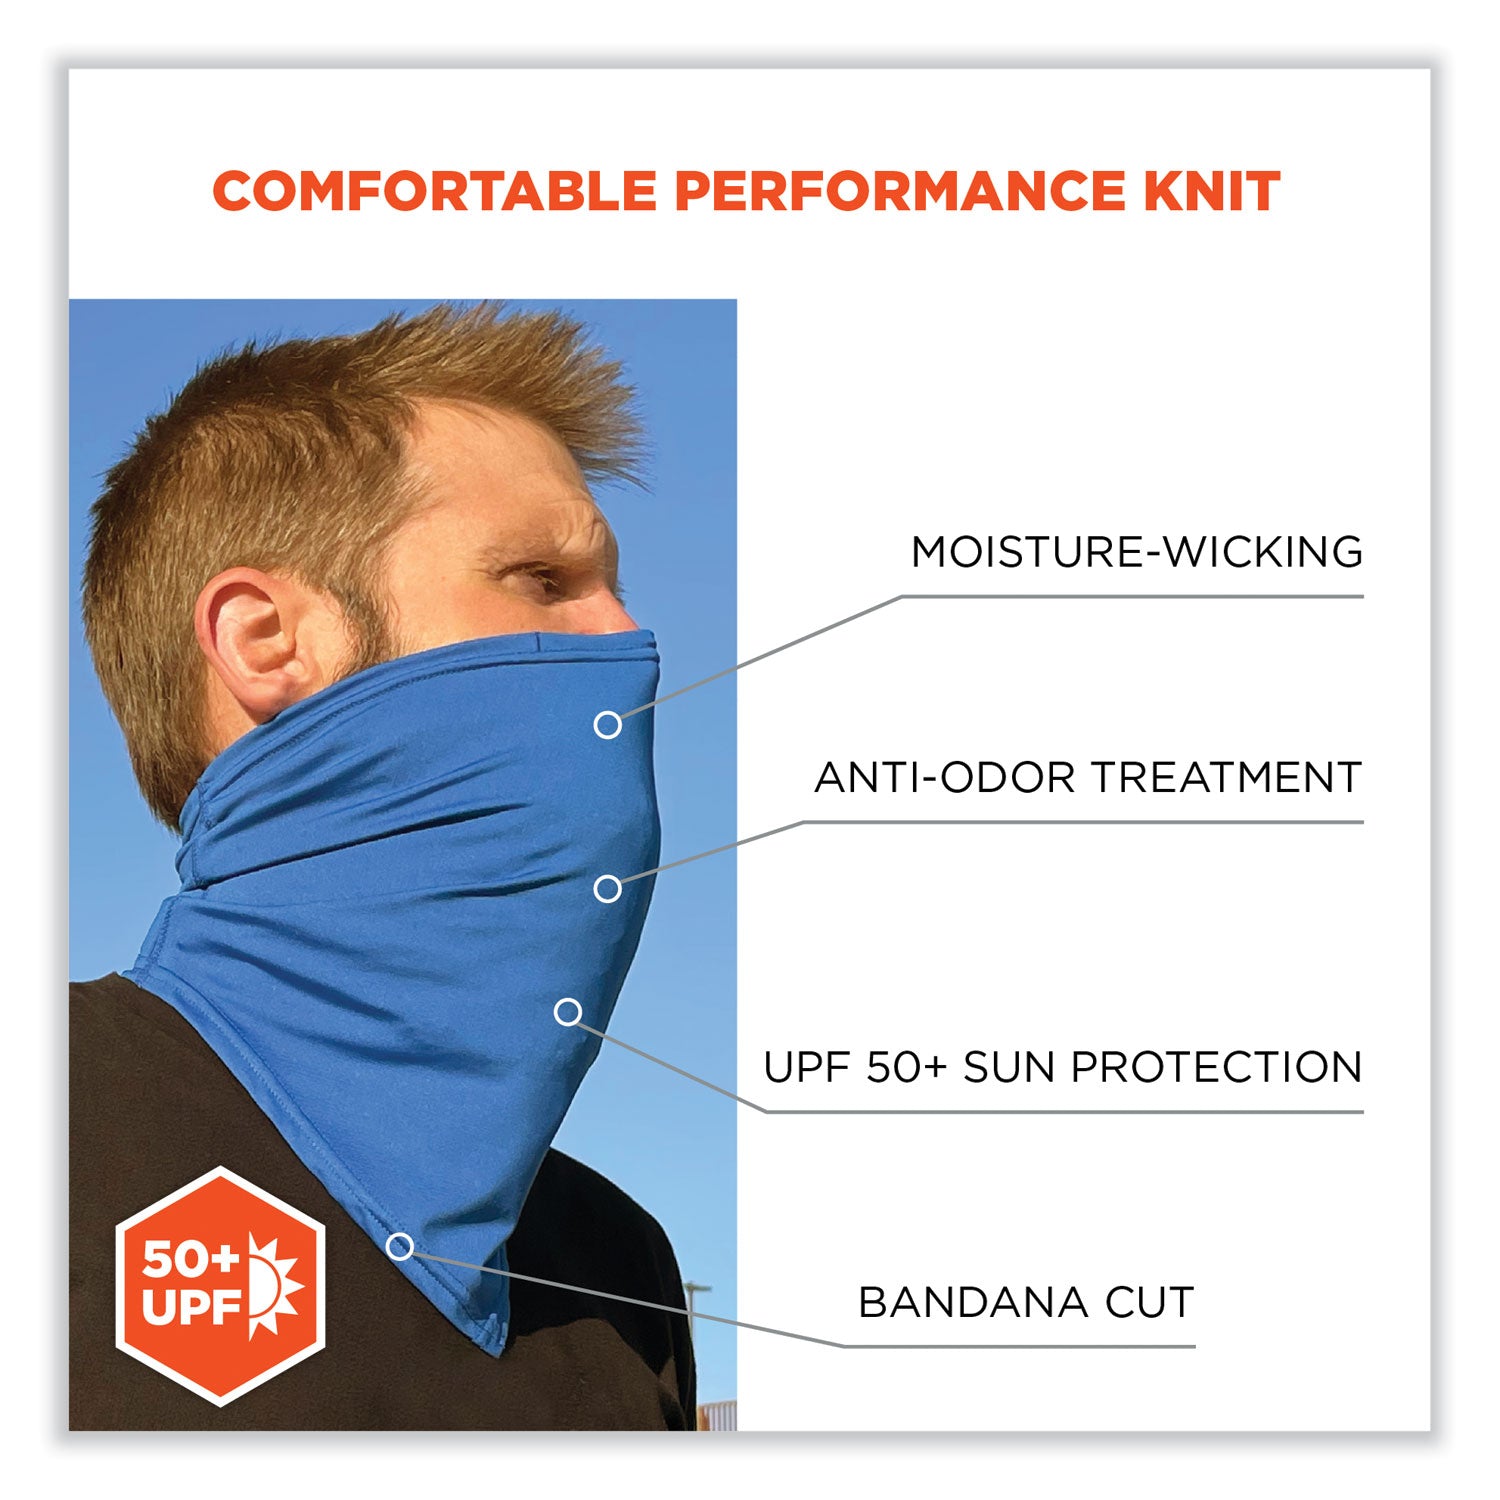 chill-its-6482-cooling-neck-gaiter-bandana-pocket-kit-polyester-spandex-small-medium-blue-ships-in-1-3-business-days_ego42135 - 2